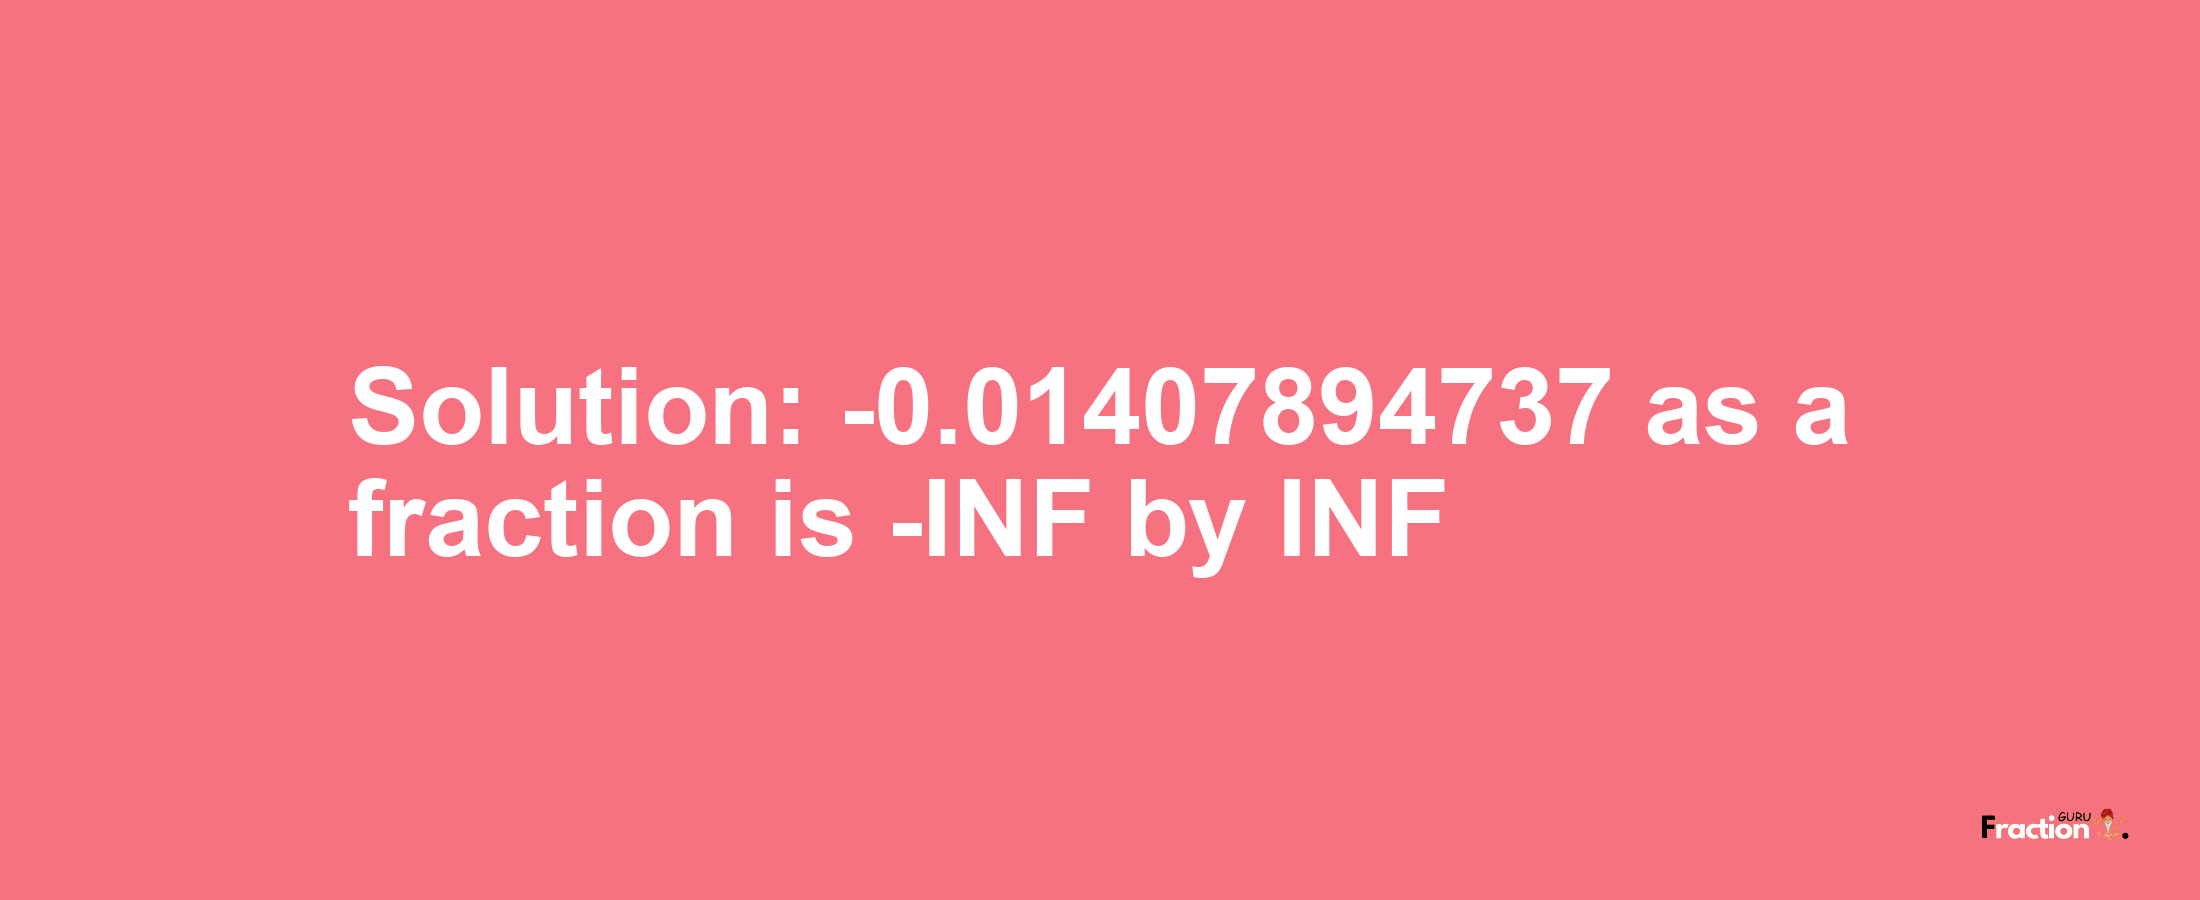 Solution:-0.01407894737 as a fraction is -INF/INF